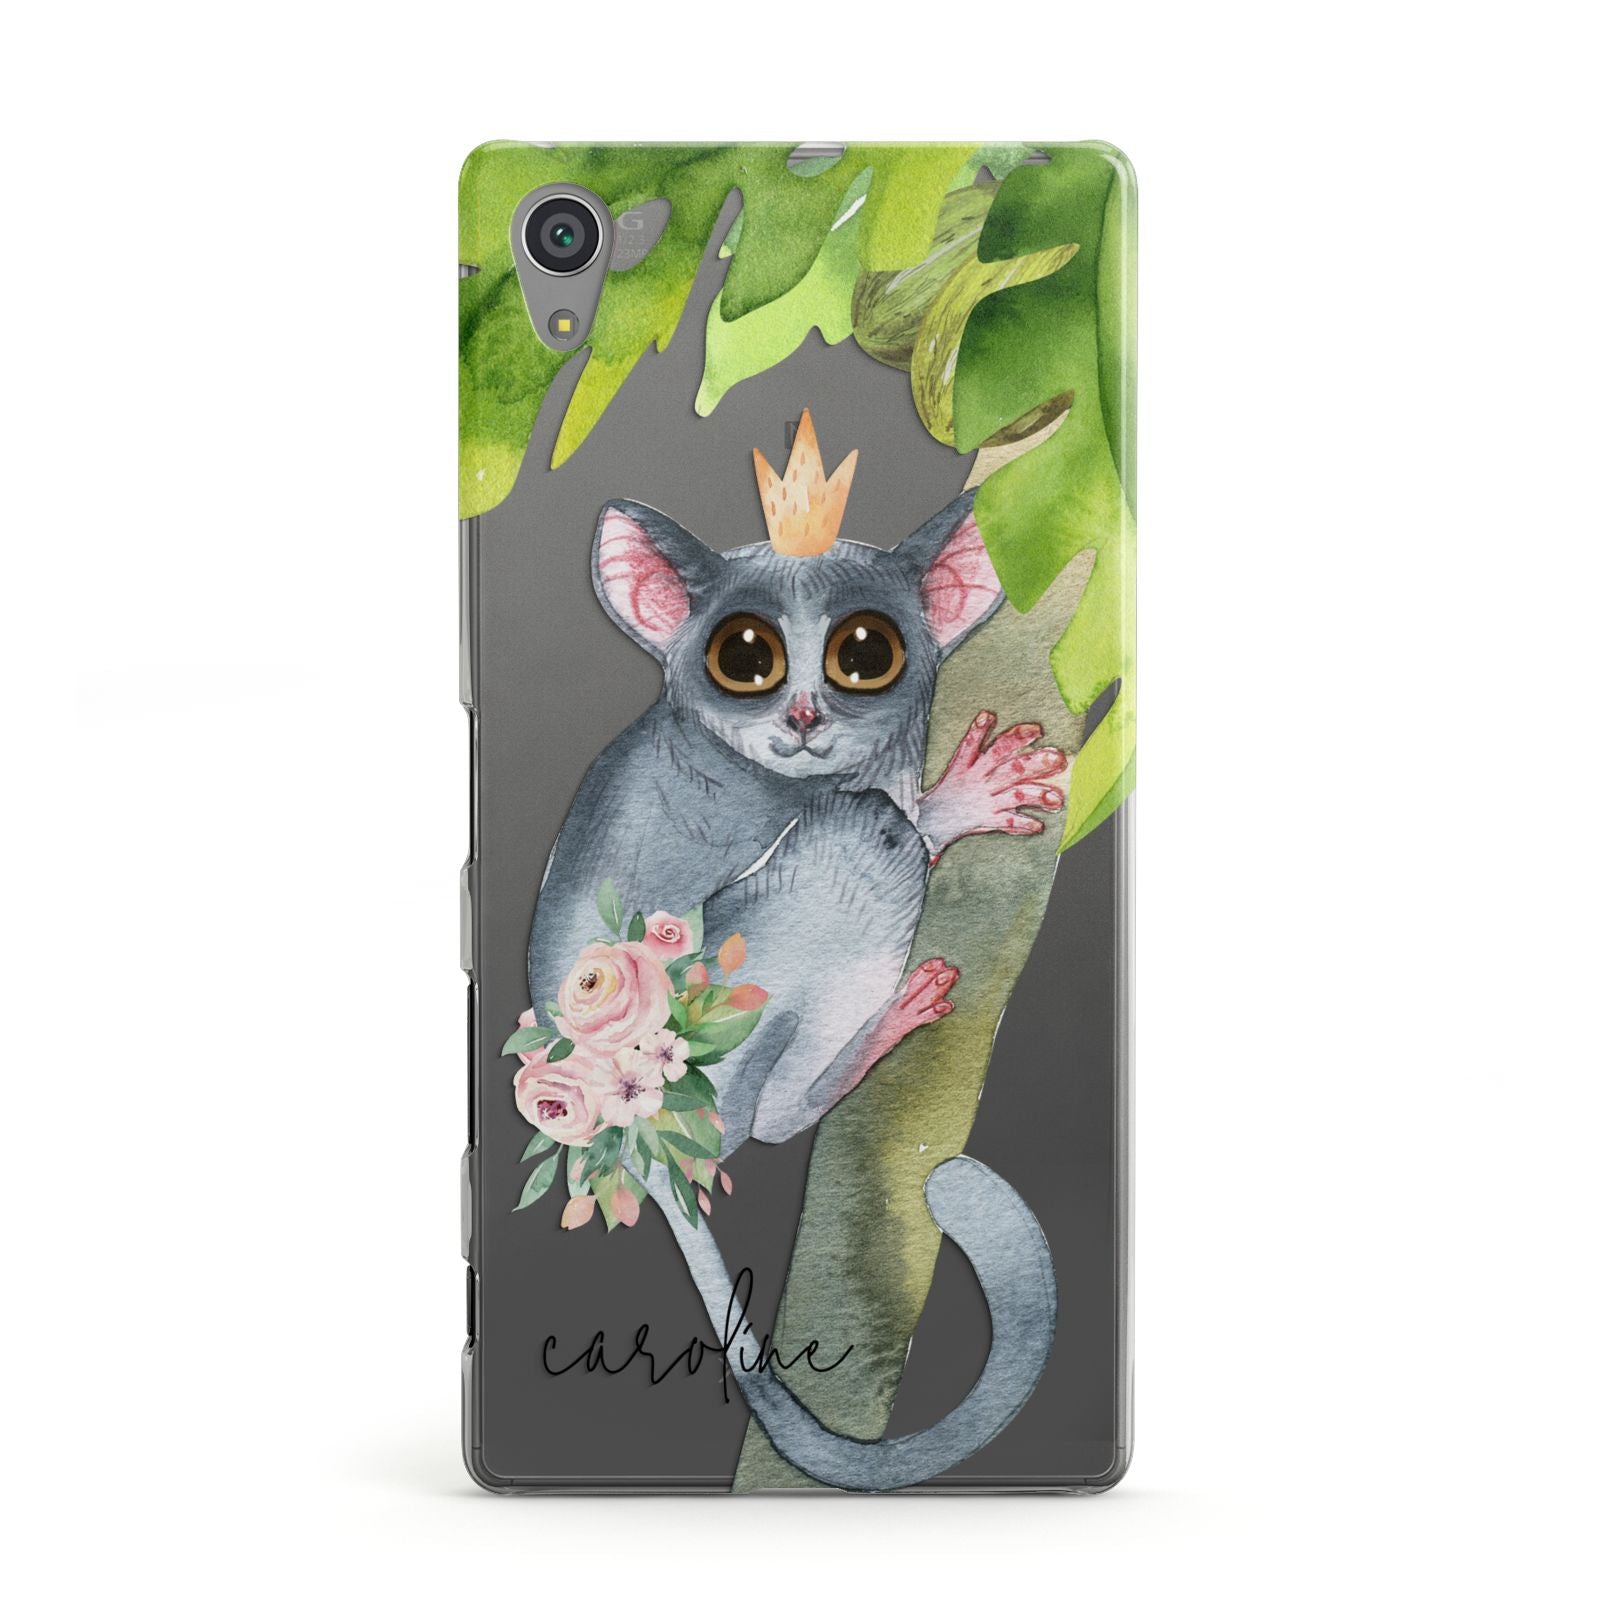 Personalised Galago Sony Xperia Case